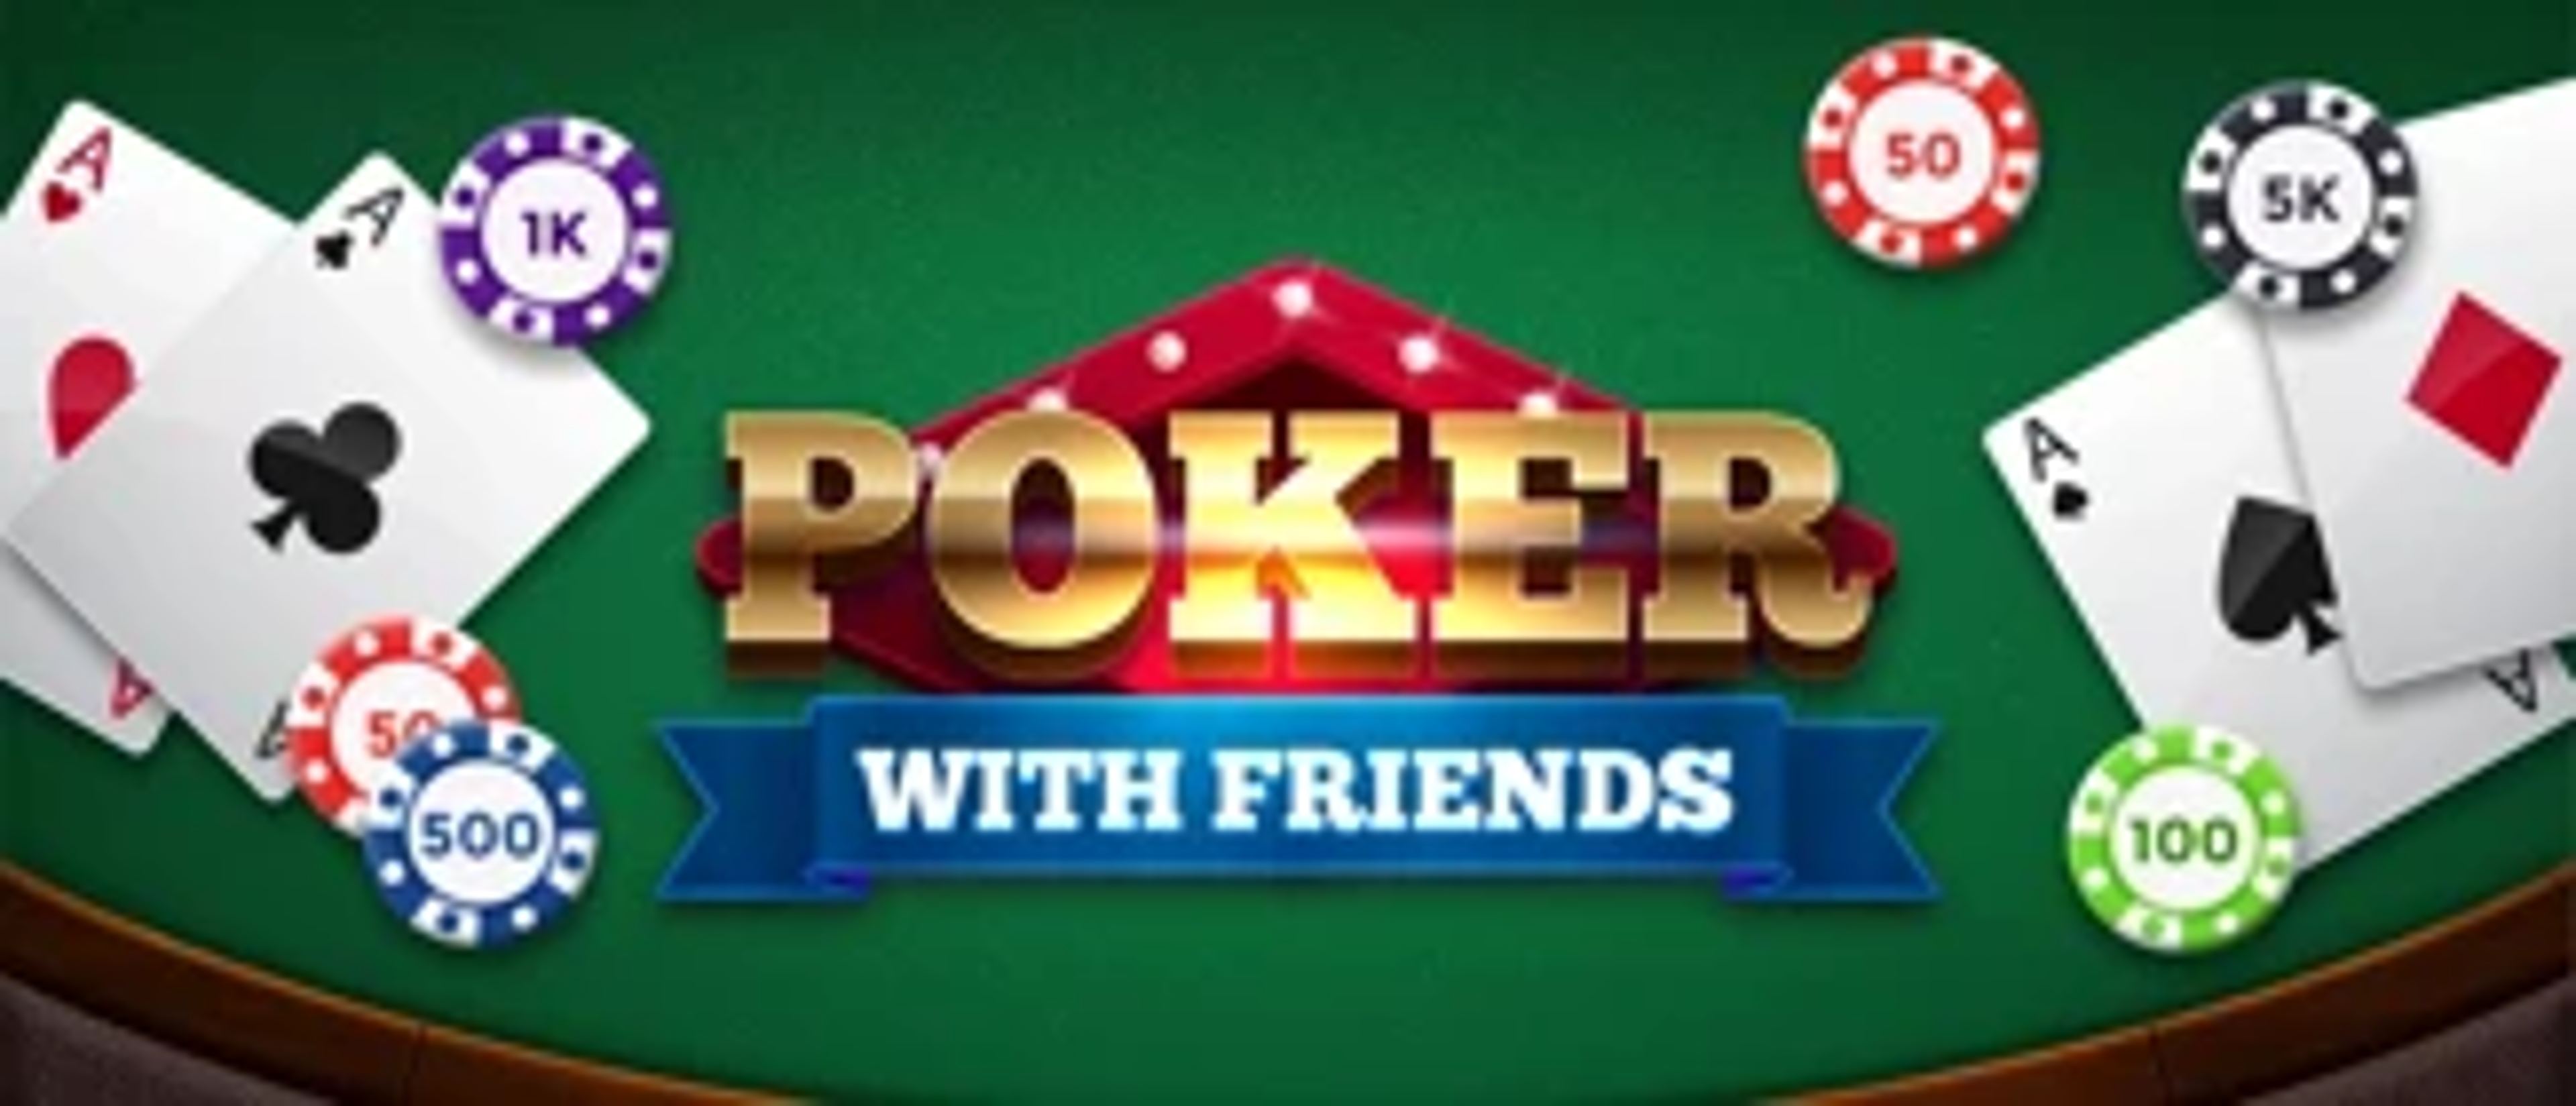 Poker with Friends